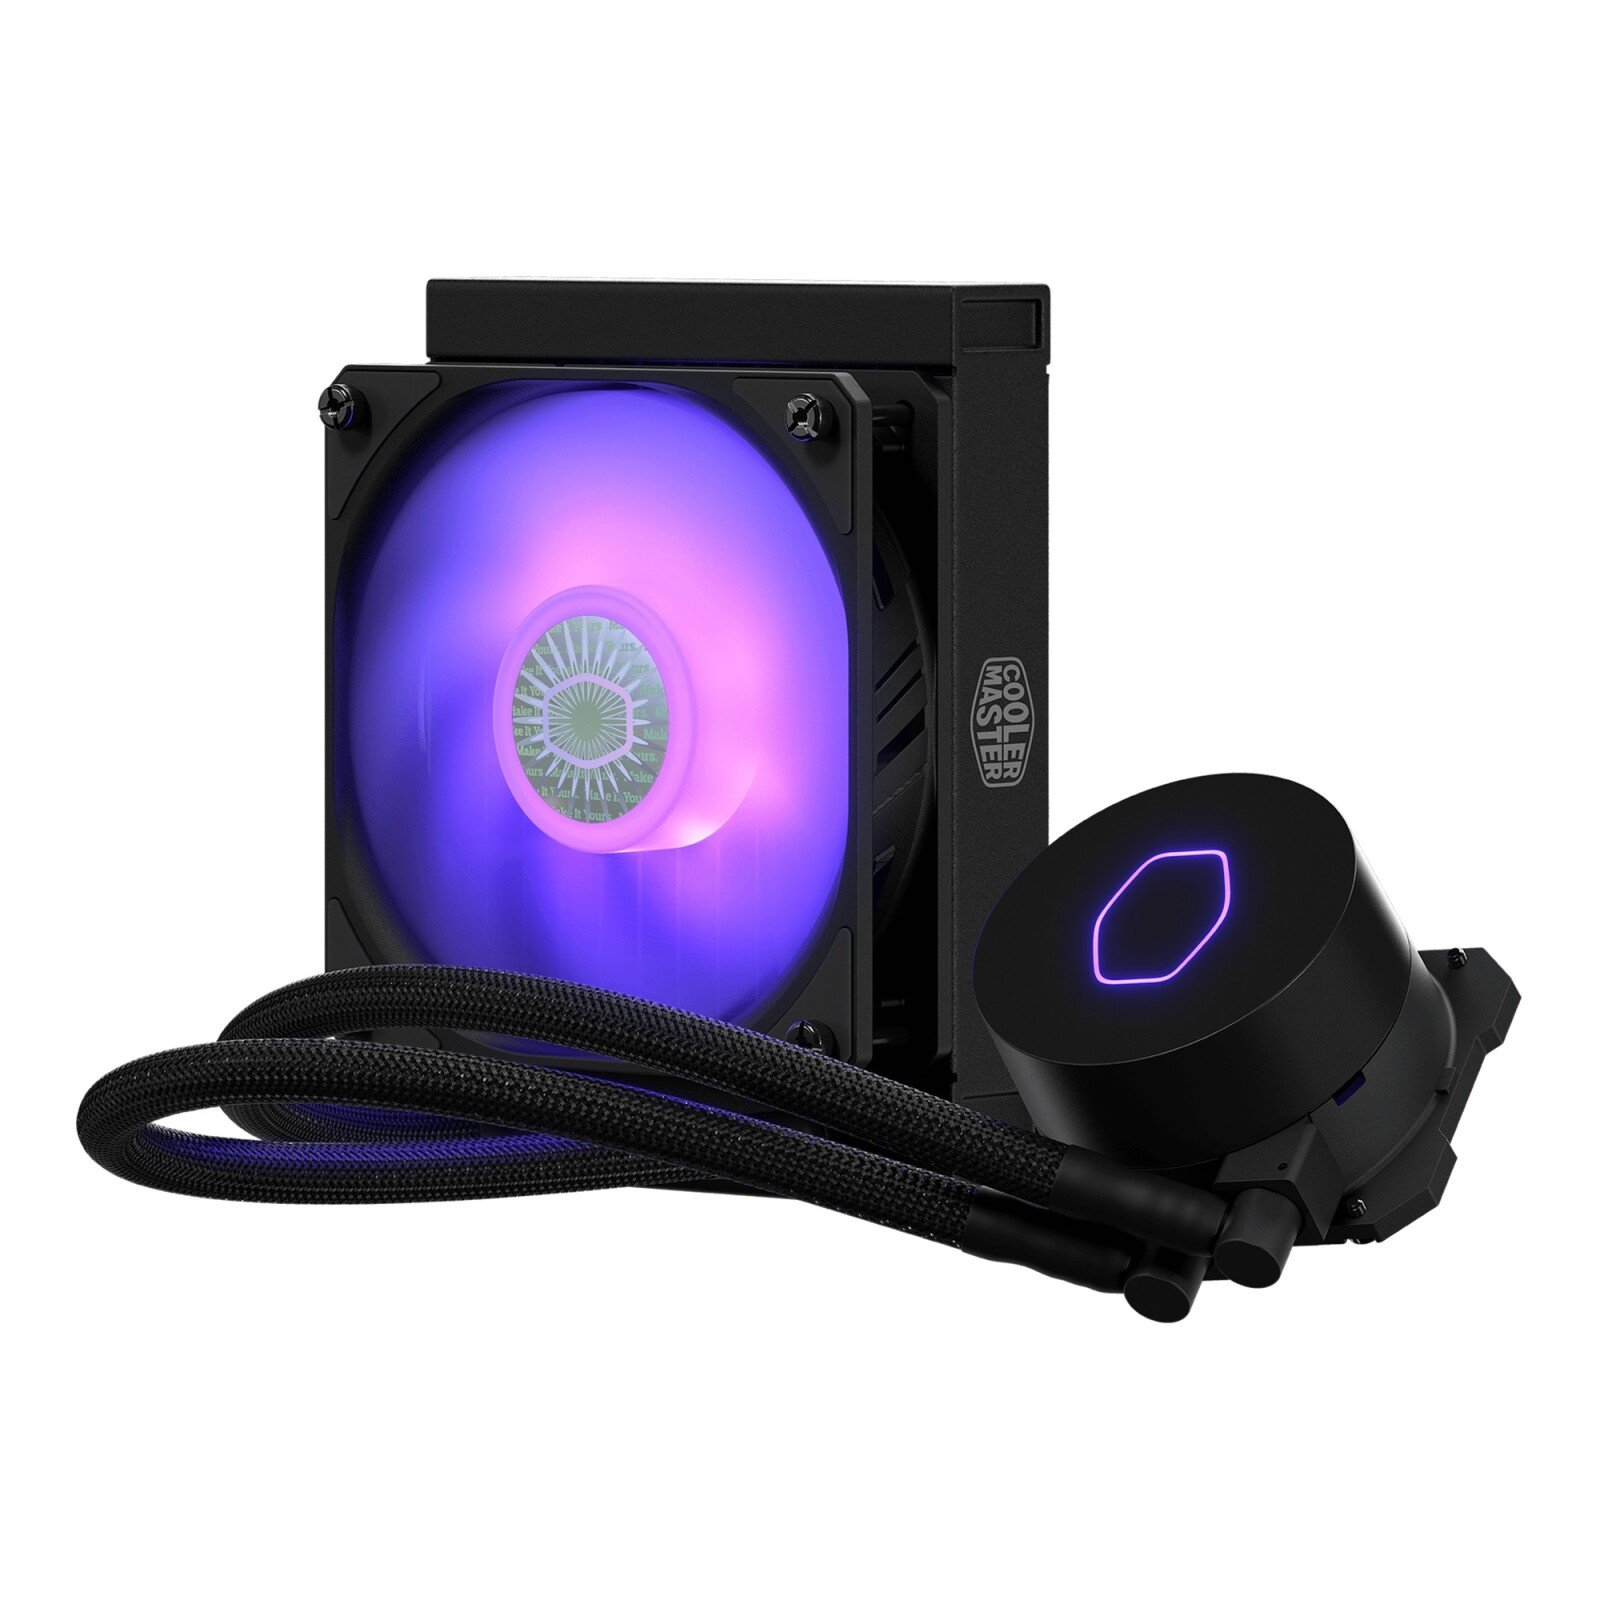 COOLER COOLER MASTER, skt. universal, racire cu lichid, vent. 120 mm, 1800 rpm, LED RGB ,"MLW-D12M-A18PC-R2" (include TV 0.8 lei) thumb